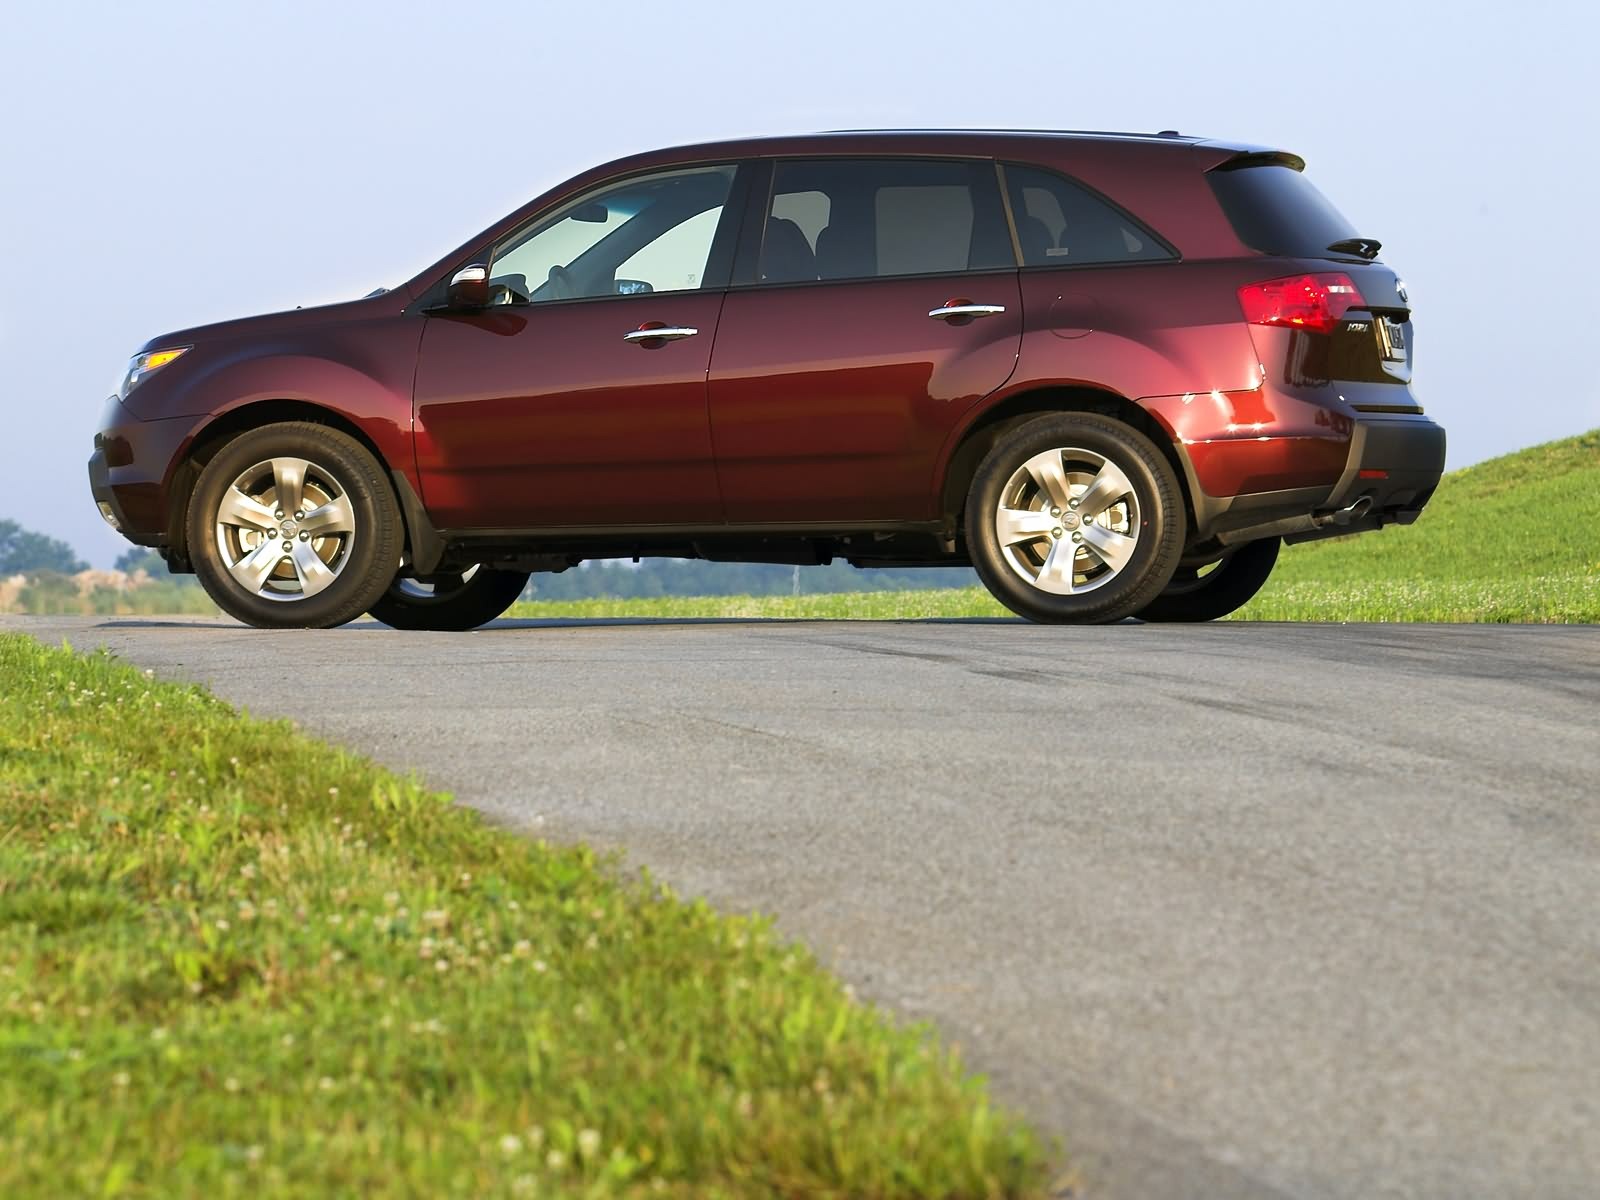 Acura MDX sport utility vehicle wallpapers #19 - 1600x1200